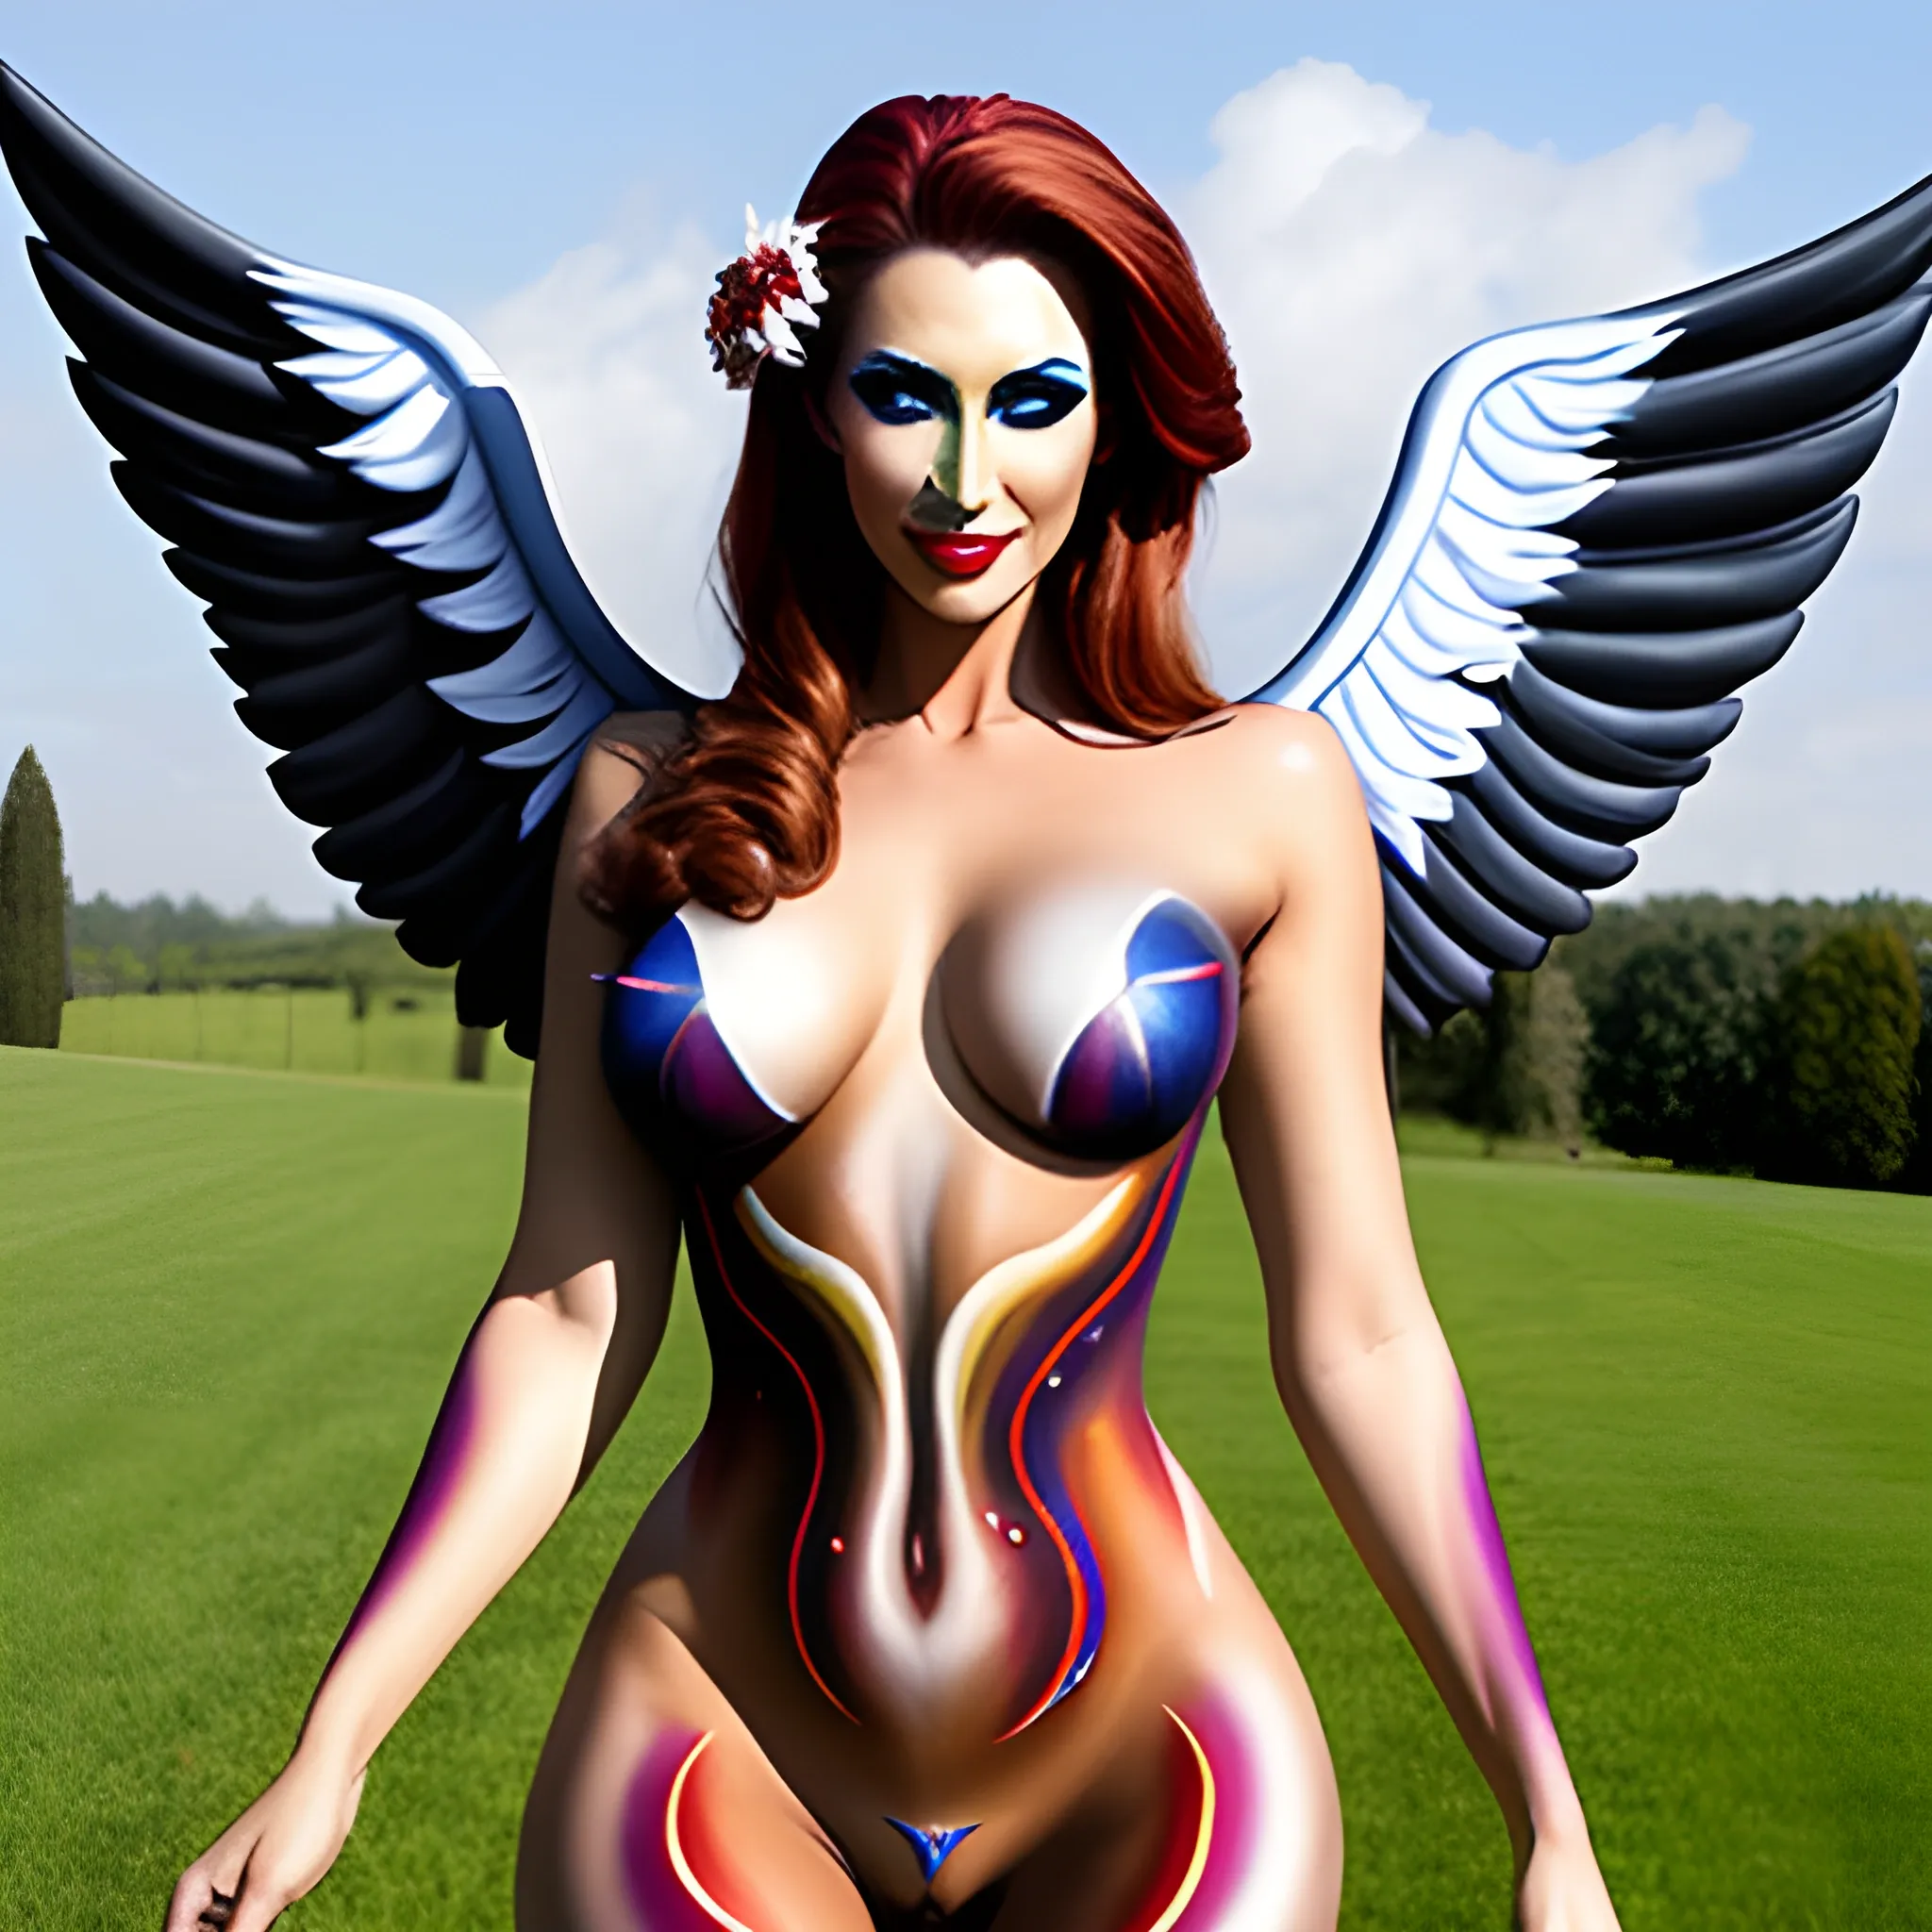 Full body painted girl with angel wings. bodypainting